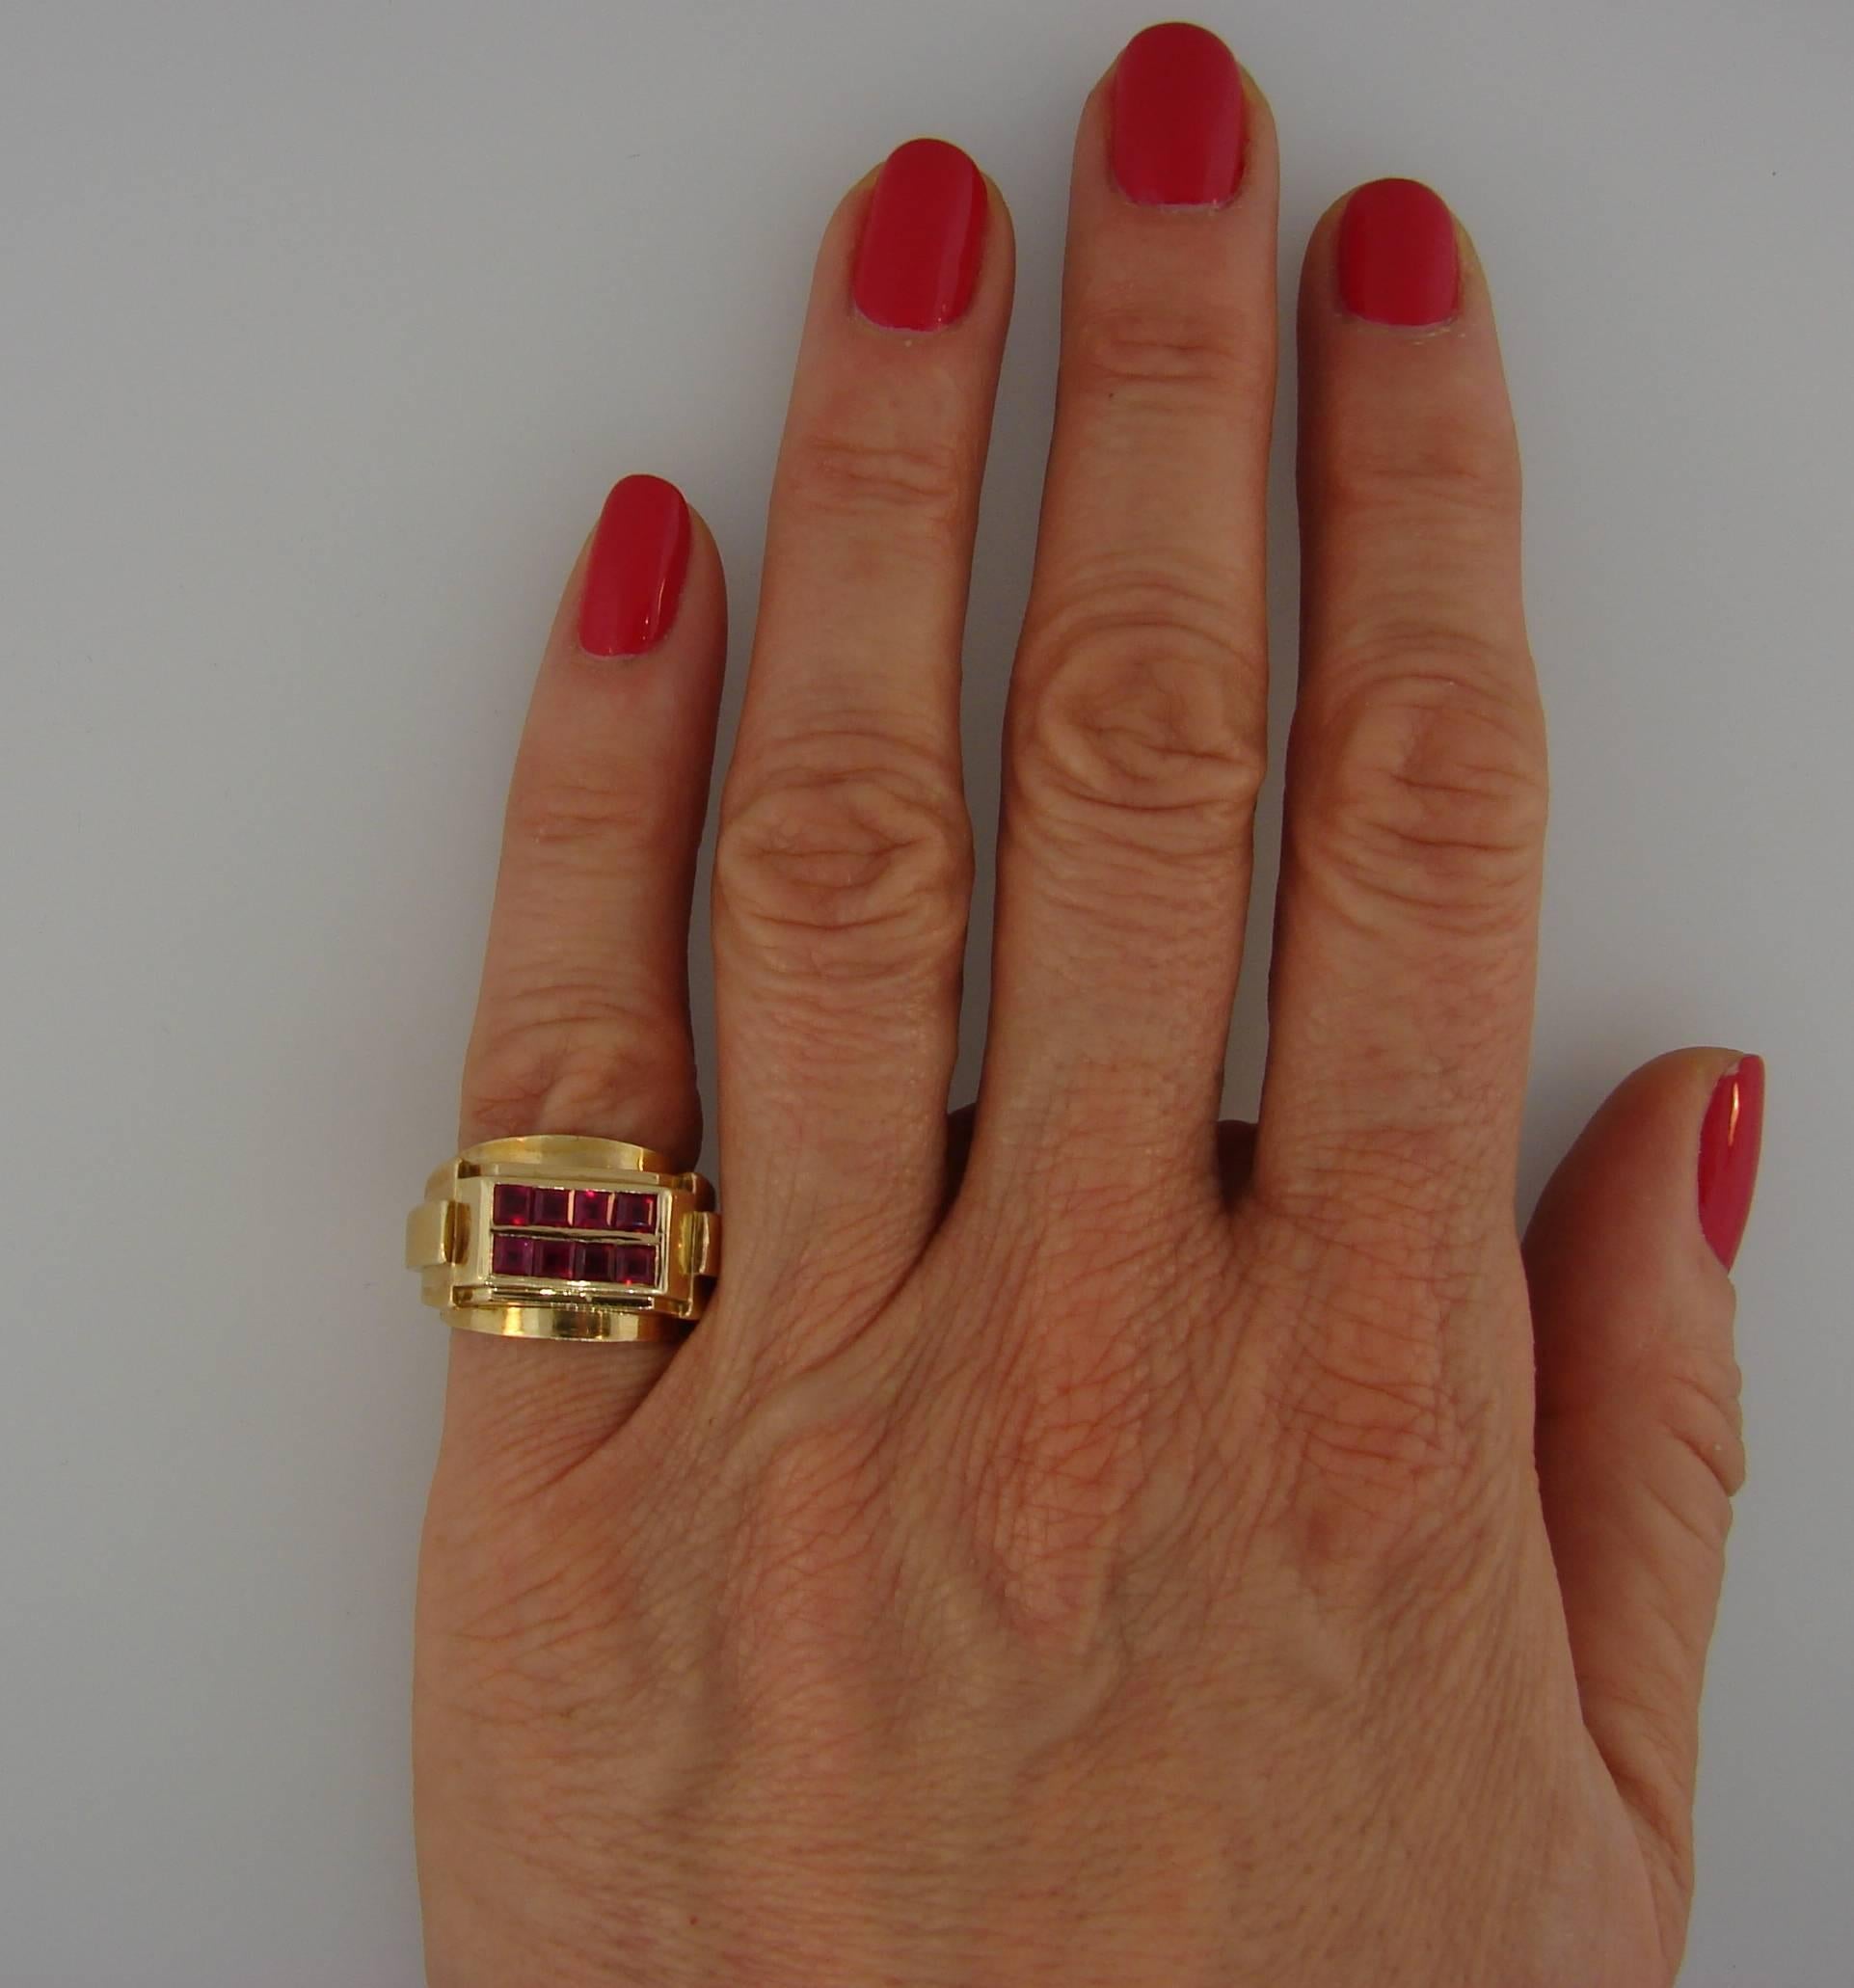 Classy Retro ring created by Rene Boivin in the 1940's. Made of 18 karat yellow gold and set with eight step cut rubies. Strong geometrical design and perfect proportions are the highlights of this ring and make it a chic pinky ring. Elegant and